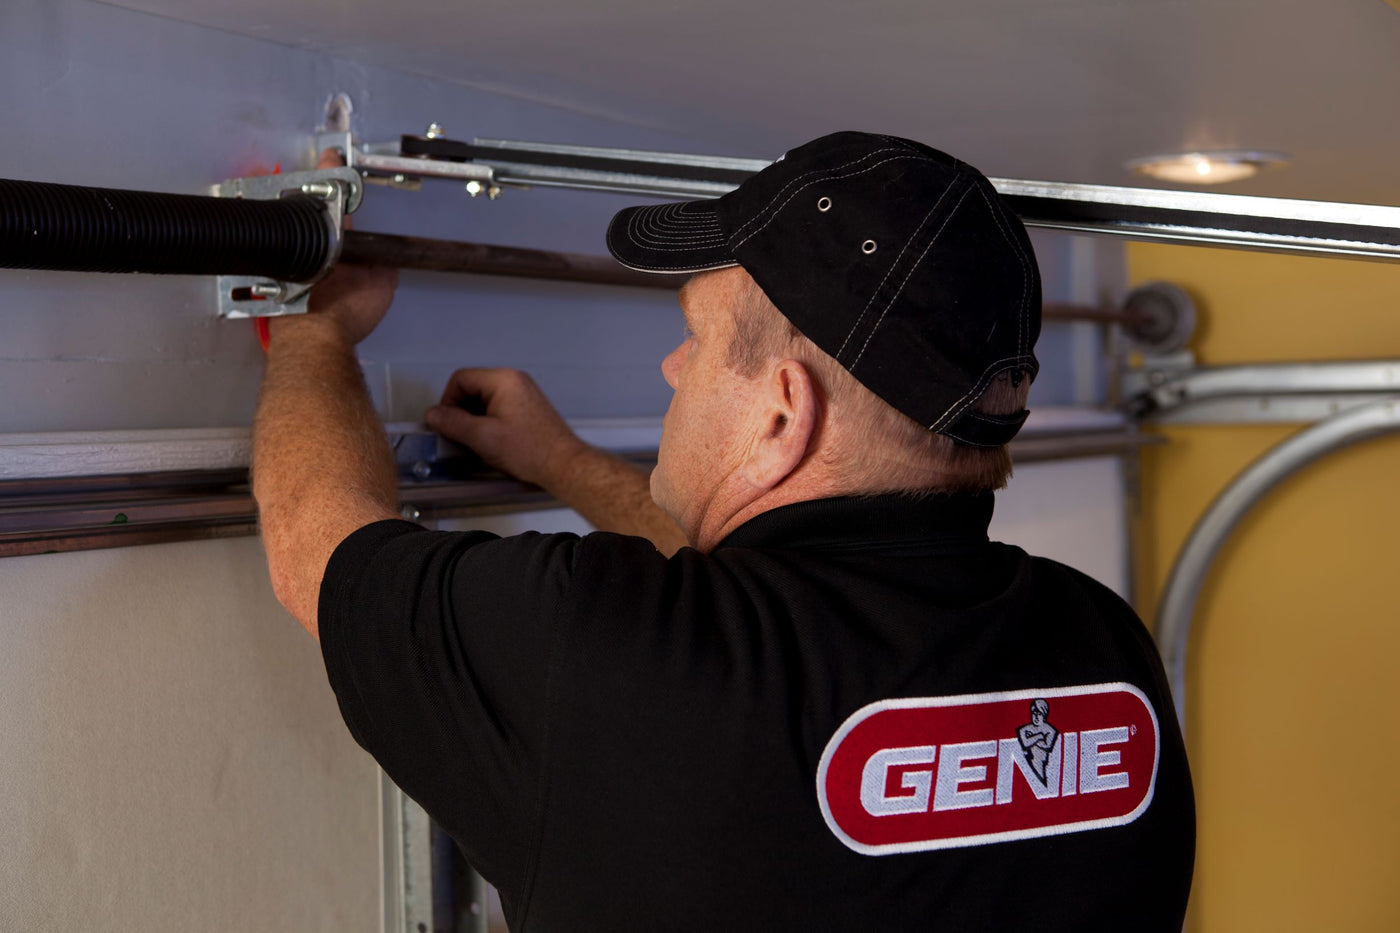 Modern How To Install Genie Garage Door Opener for Small Space